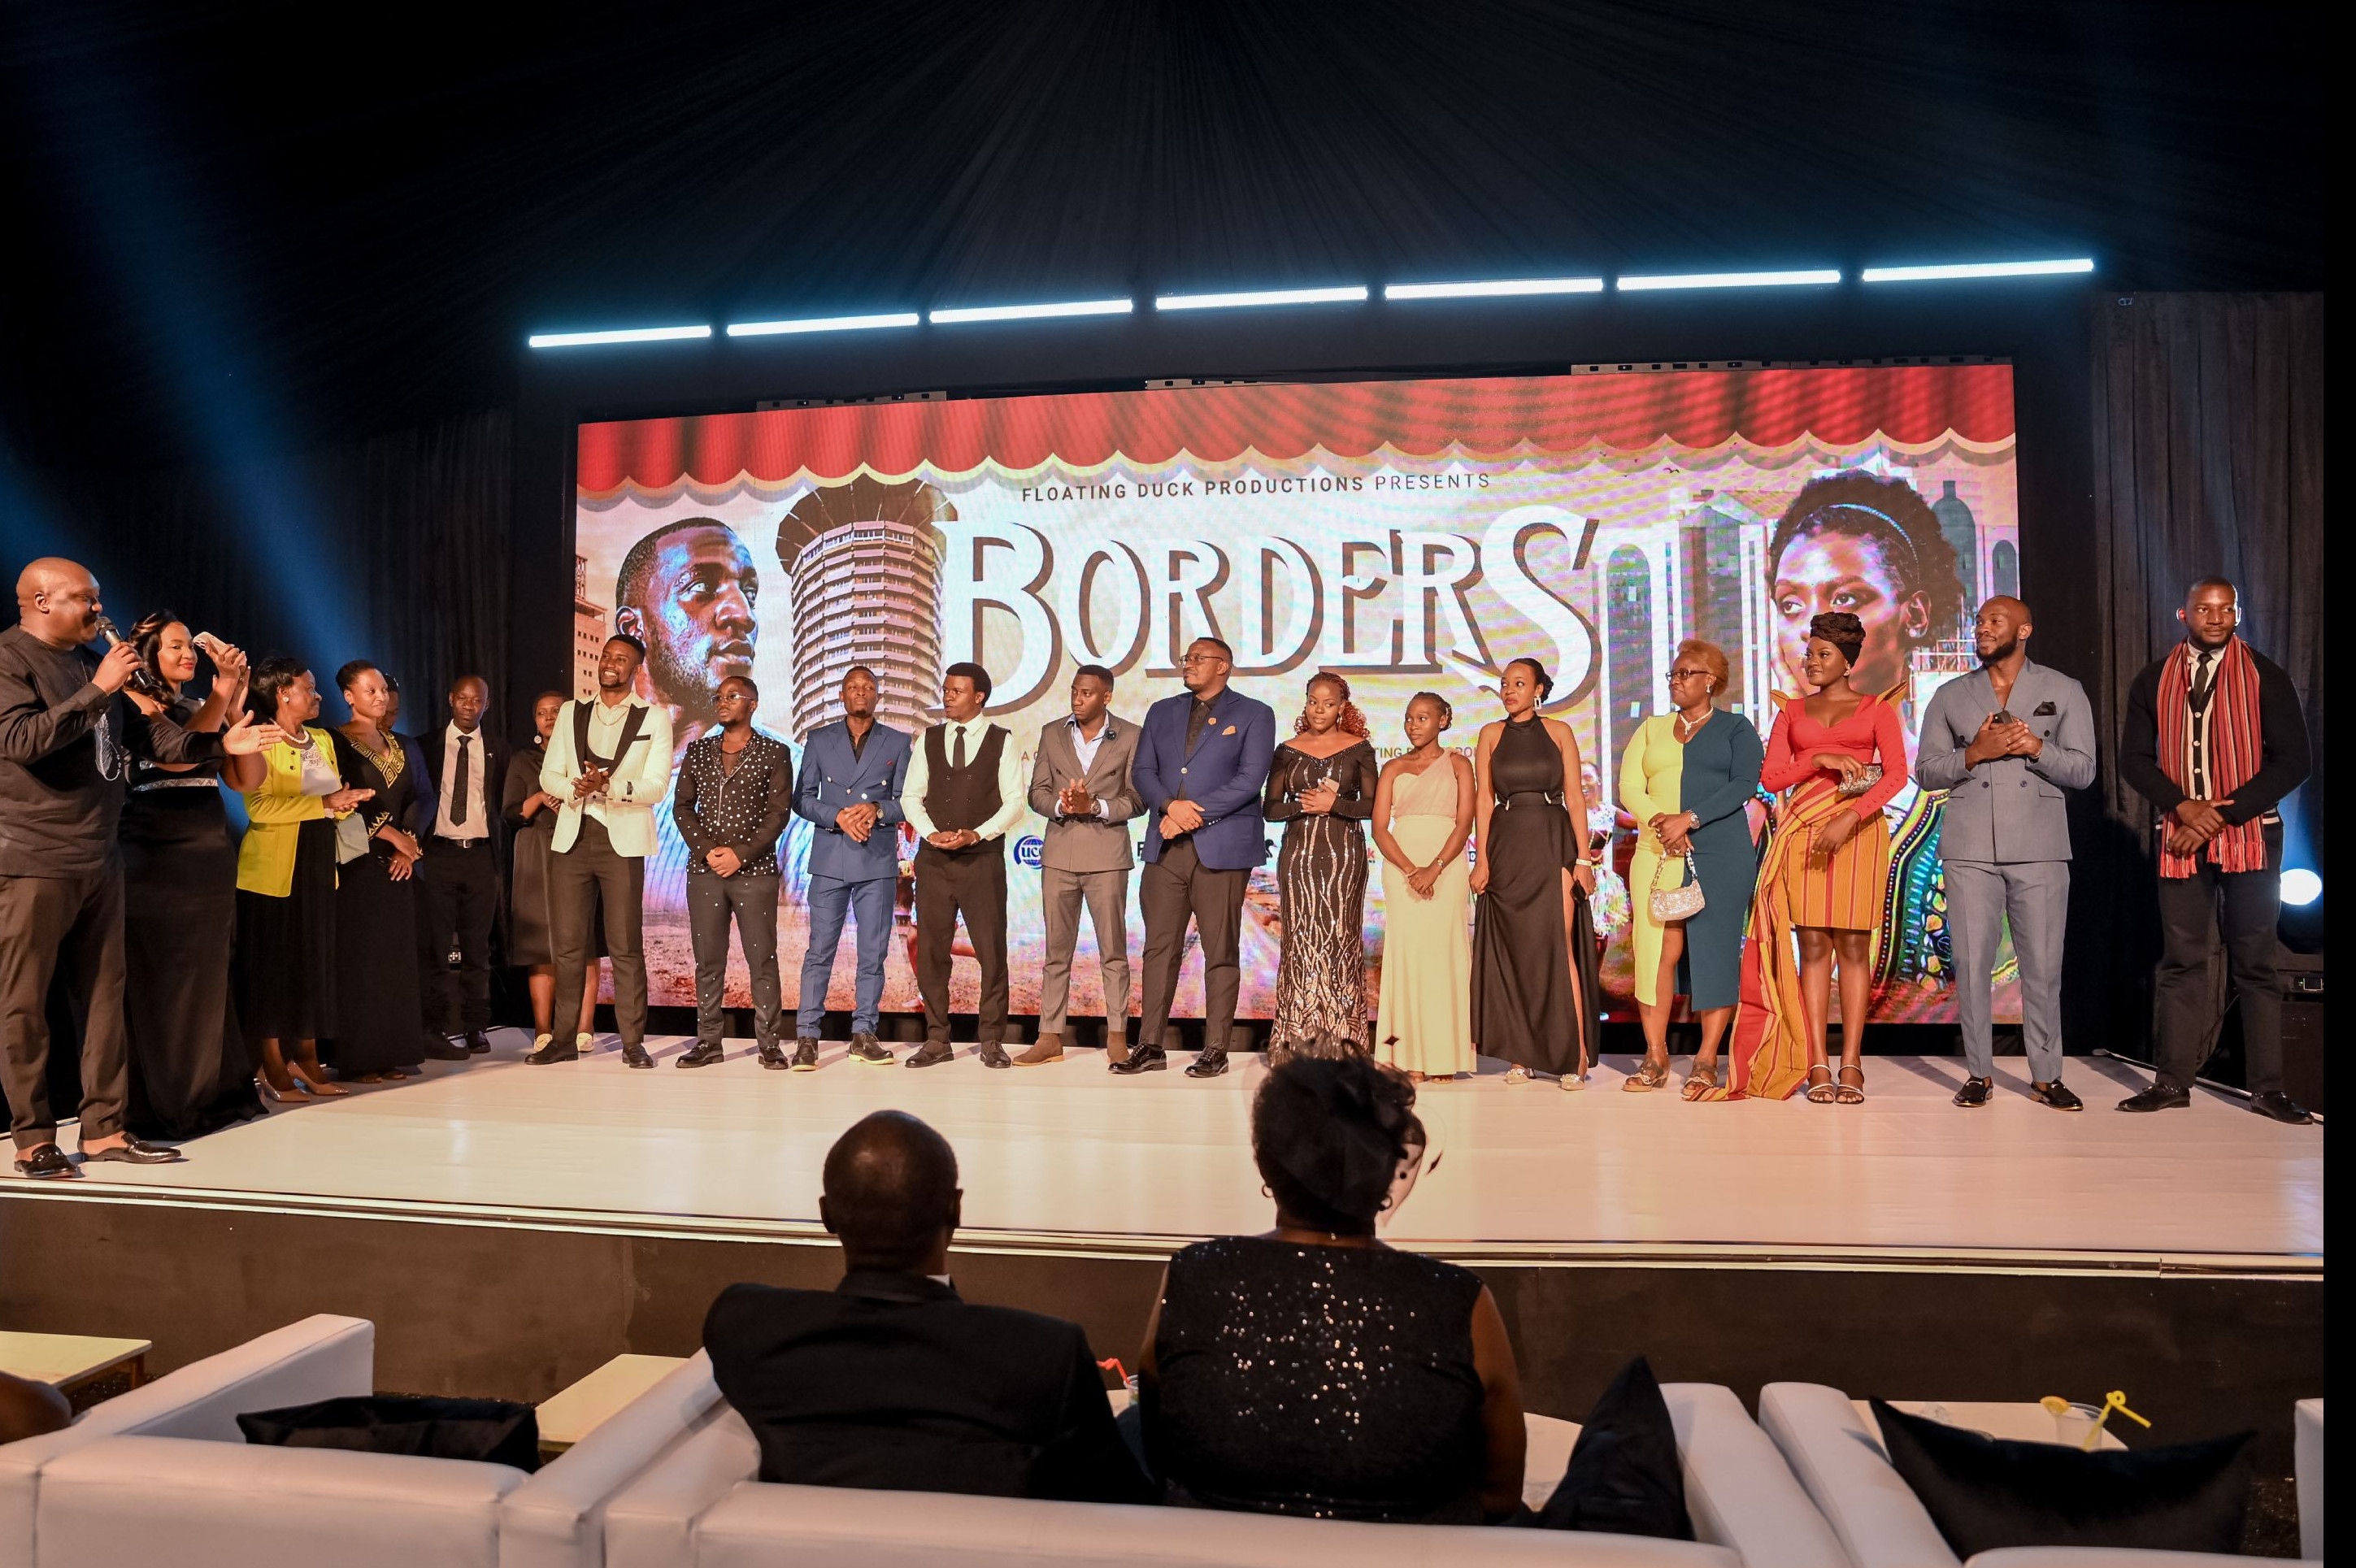 It was glamour and glitters at the Premiere of 'Borders': A TV Show Produced by Daphne Ampaire Karema